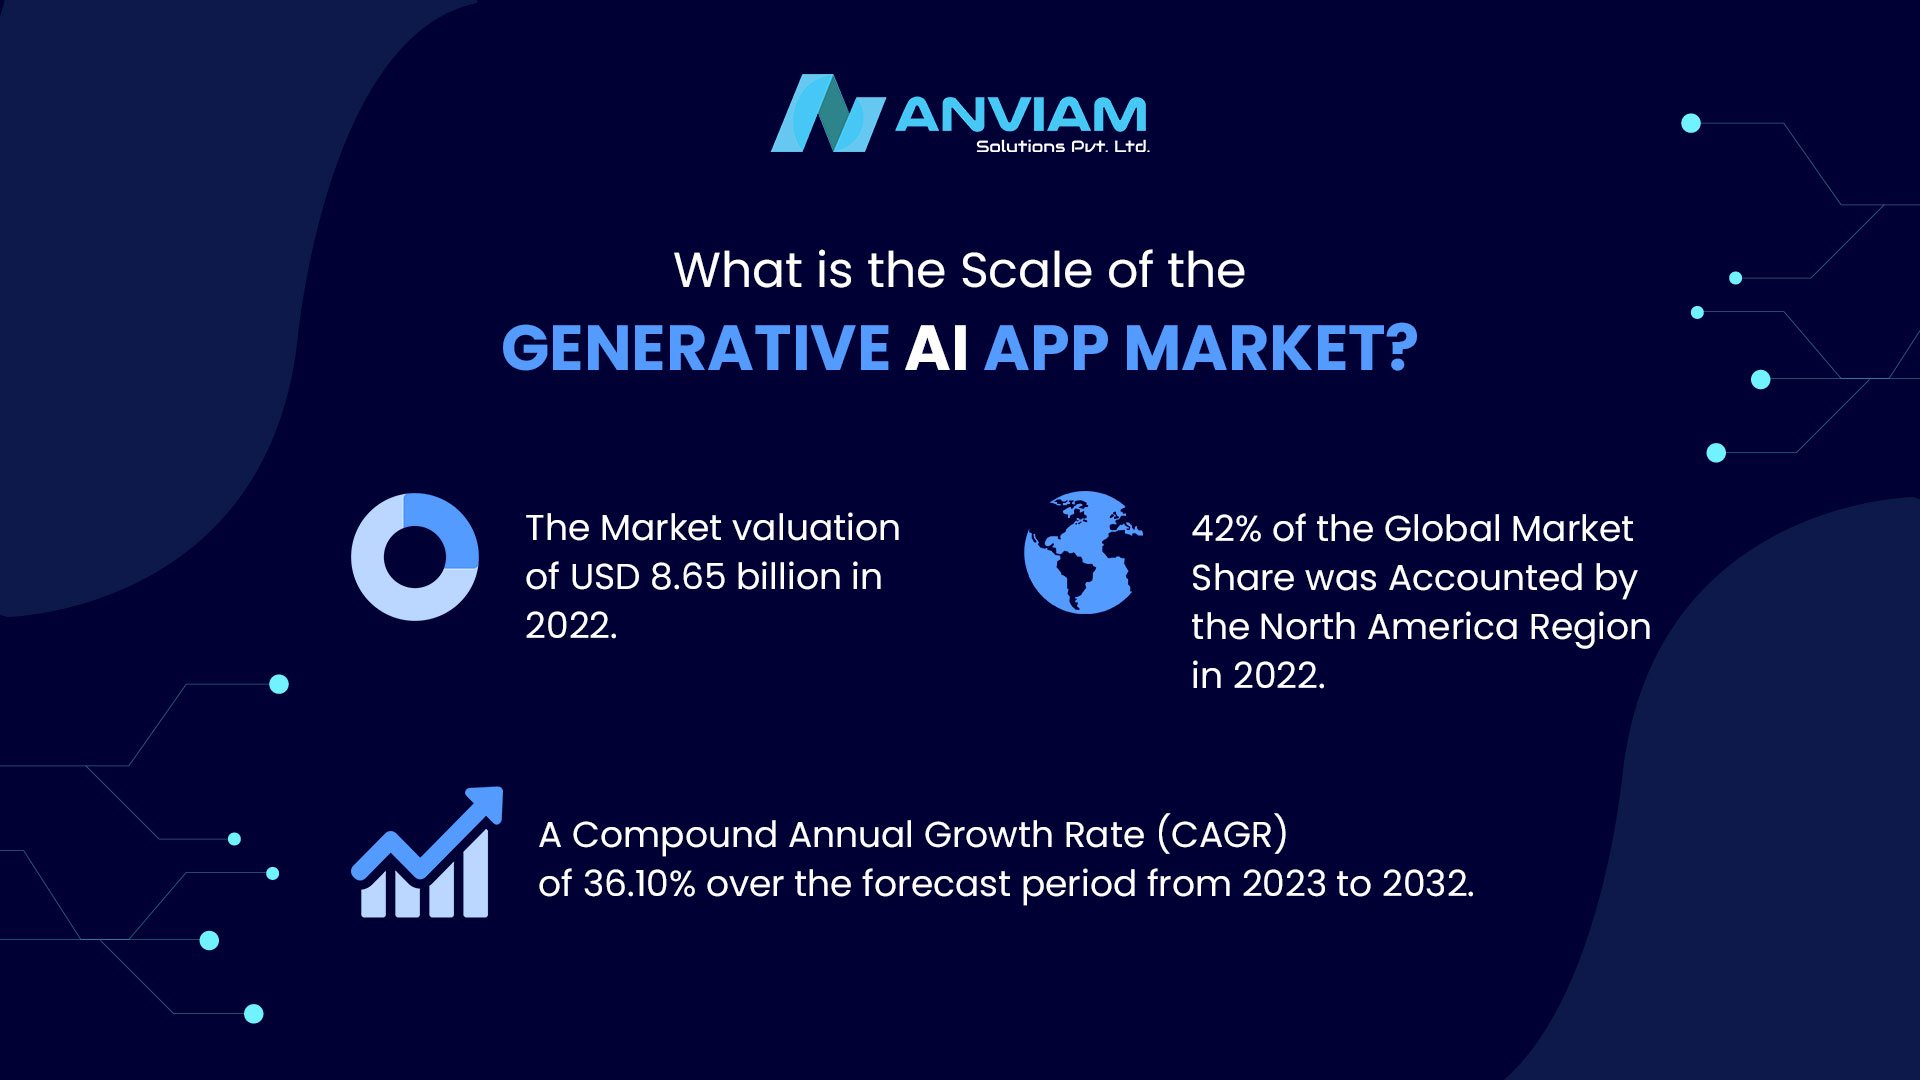 The Scale of the Generative AI App Market